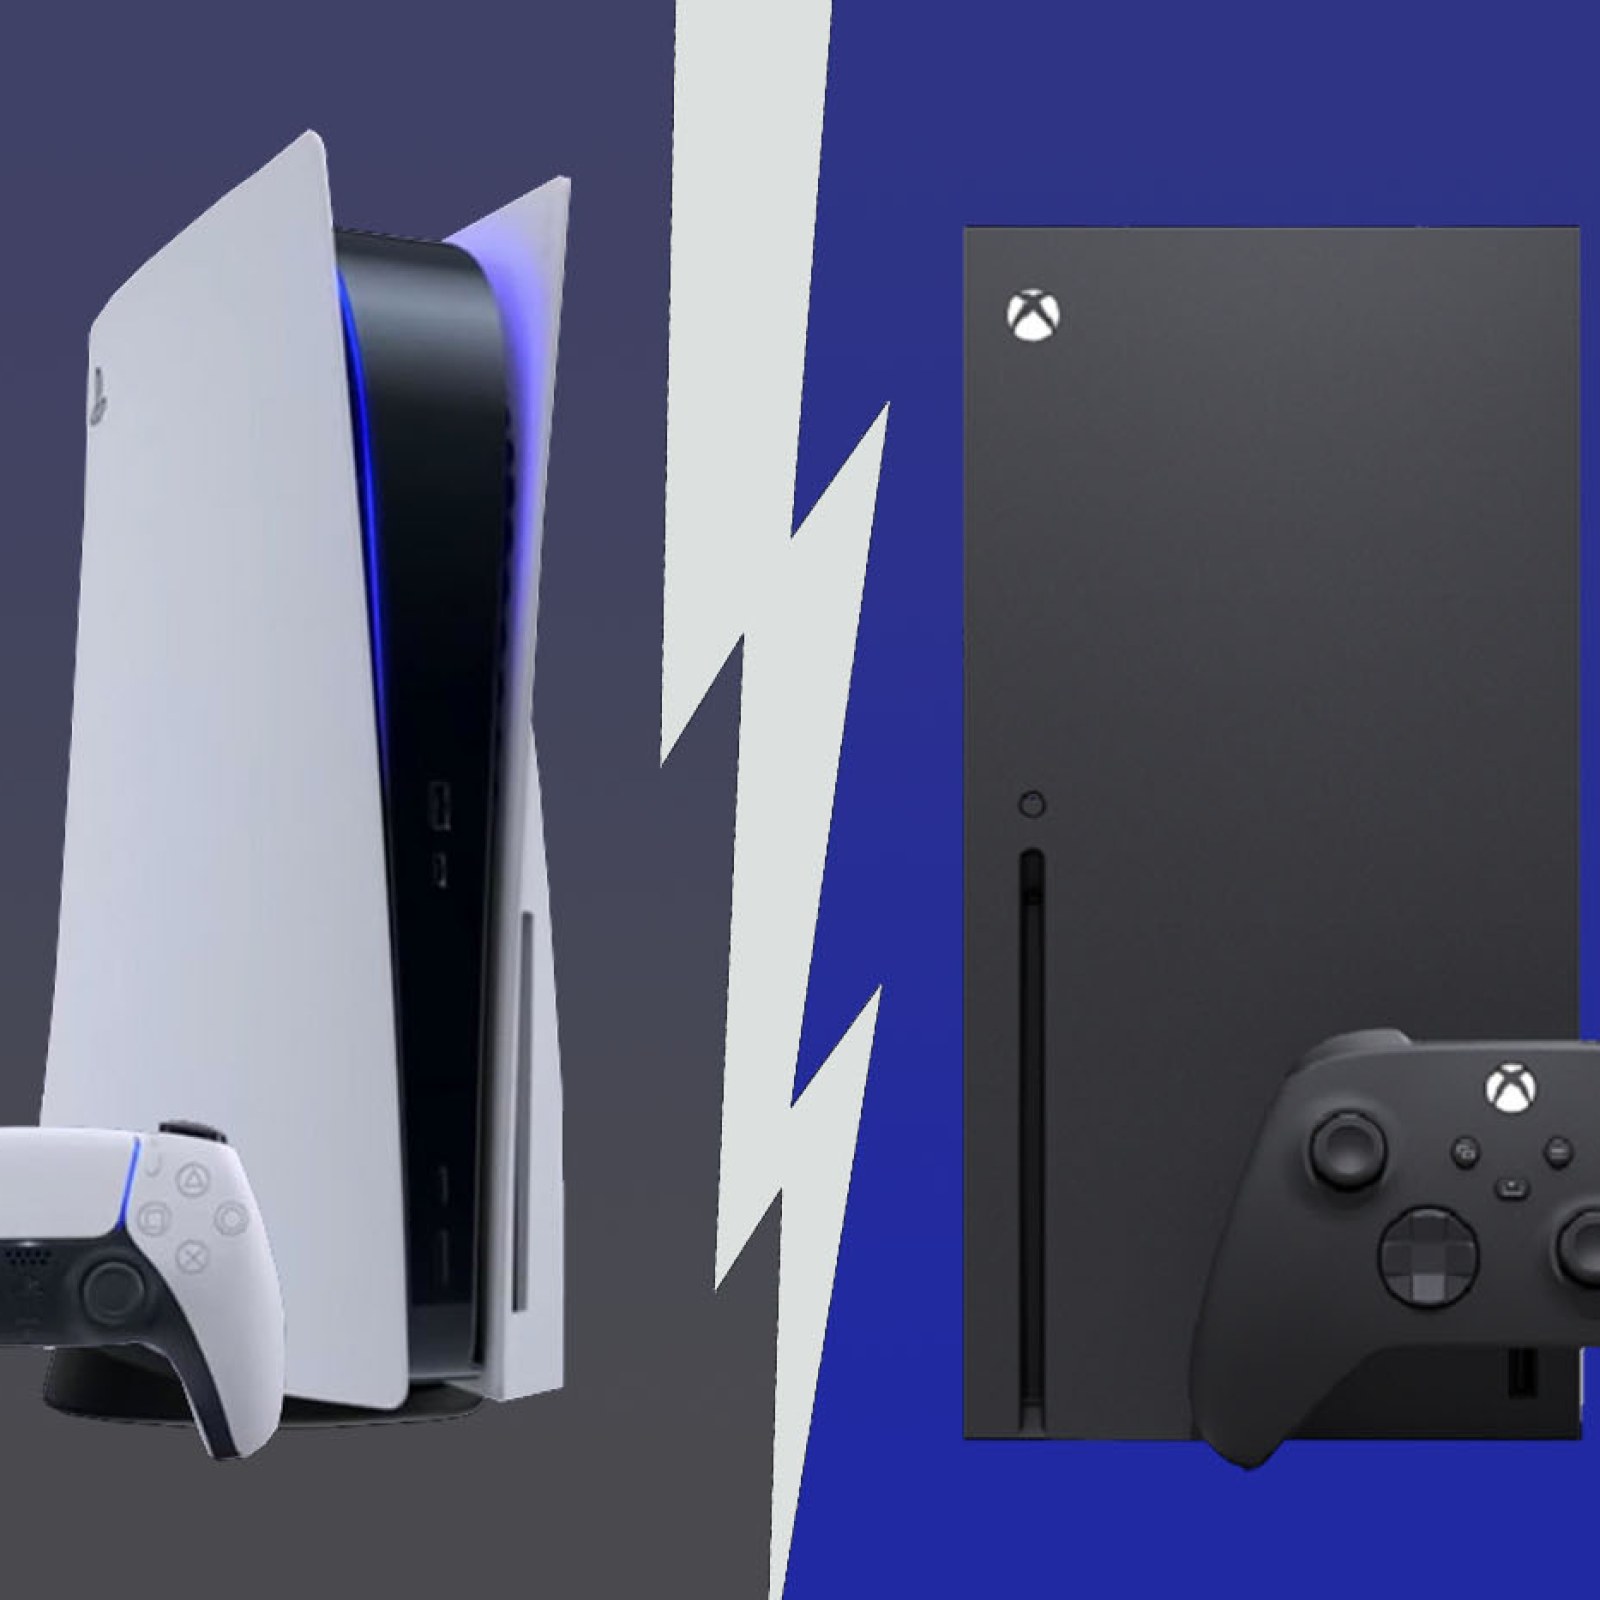 PS5 vs. Xbox Series X: Which Should You Buy?